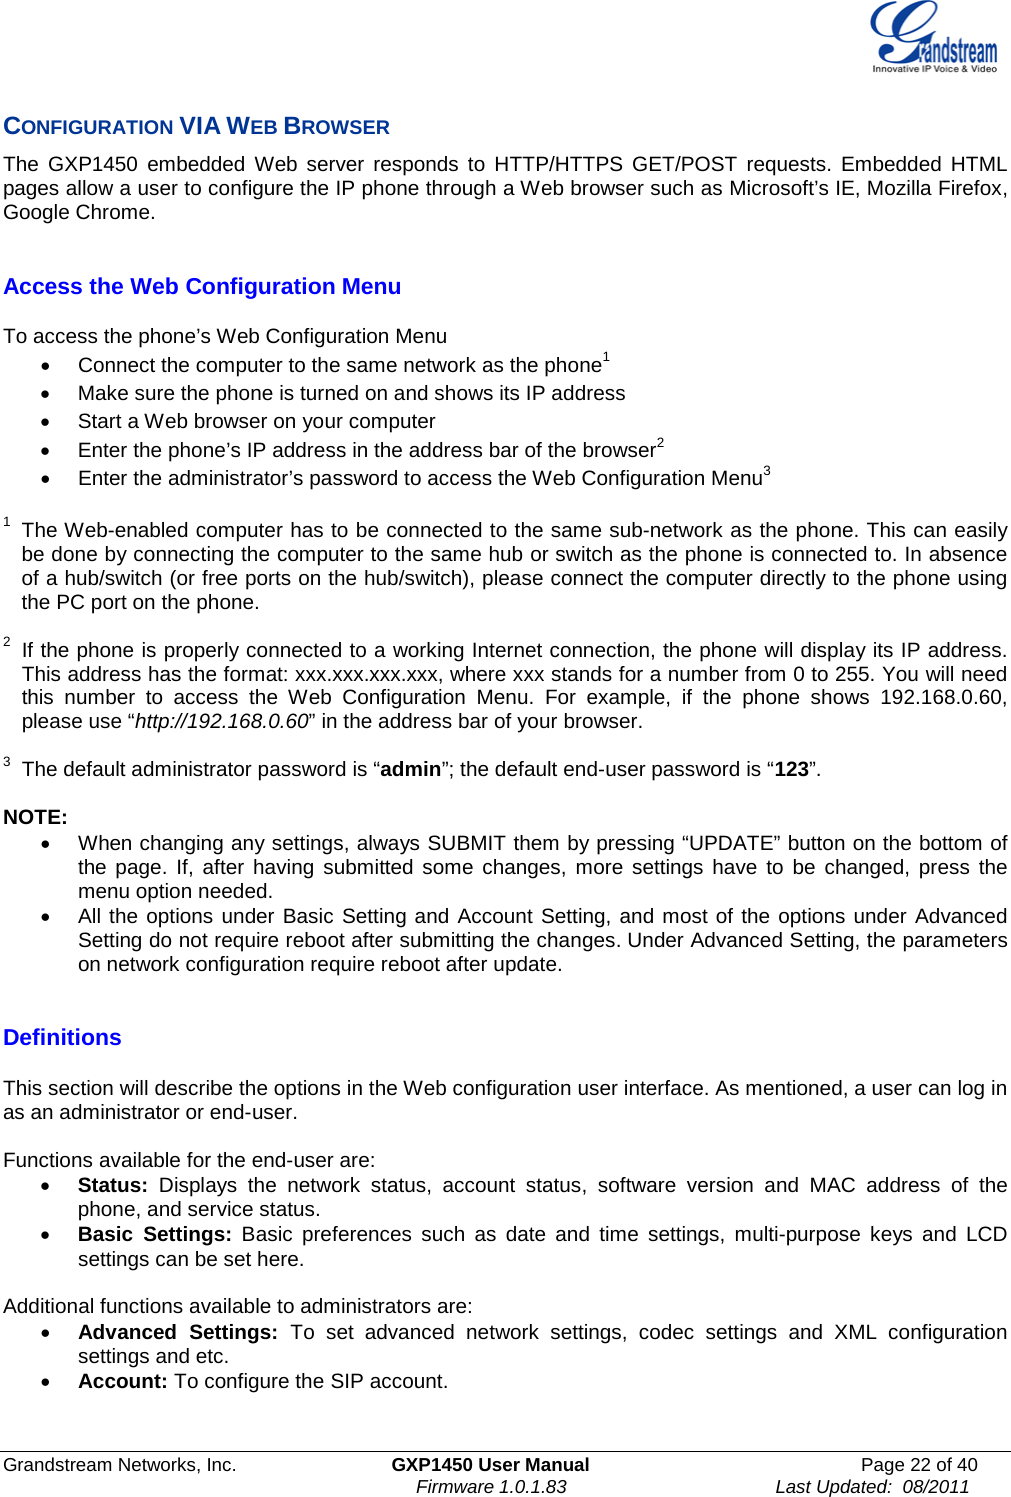  Grandstream Networks, Inc. GXP1450 User Manual Page 22 of 40                                                                          Firmware 1.0.1.83                                        Last Updated:  08/2011  CONFIGURATION VIA WEB BROWSER The  GXP1450 embedded Web server responds to HTTP/HTTPS GET/POST requests. Embedded HTML pages allow a user to configure the IP phone through a Web browser such as Microsoft’s IE, Mozilla Firefox, Google Chrome.   Access the Web Configuration Menu  To access the phone’s Web Configuration Menu • Connect the computer to the same network as the phone1 • Make sure the phone is turned on and shows its IP address • Start a Web browser on your computer • Enter the phone’s IP address in the address bar of the browser2 • Enter the administrator’s password to access the Web Configuration Menu3  1 The Web-enabled computer has to be connected to the same sub-network as the phone. This can easily be done by connecting the computer to the same hub or switch as the phone is connected to. In absence of a hub/switch (or free ports on the hub/switch), please connect the computer directly to the phone using the PC port on the phone.   2  If the phone is properly connected to a working Internet connection, the phone will display its IP address. This address has the format: xxx.xxx.xxx.xxx, where xxx stands for a number from 0 to 255. You will need this number to access the Web Configuration Menu. For example, if the phone shows 192.168.0.60, please use “http://192.168.0.60” in the address bar of your browser.  3  The default administrator password is “admin”; the default end-user password is “123”.  NOTE:   • When changing any settings, always SUBMIT them by pressing “UPDATE” button on the bottom of the page. If, after having submitted some changes, more settings have to be changed, press the menu option needed. • All the options under Basic Setting and Account Setting, and most of the options under Advanced Setting do not require reboot after submitting the changes. Under Advanced Setting, the parameters on network configuration require reboot after update.  Definitions  This section will describe the options in the Web configuration user interface. As mentioned, a user can log in as an administrator or end-user.   Functions available for the end-user are: • Status: Displays the network status, account status, software version and MAC address of the phone, and service status. • Basic Settings: Basic preferences such as date and time settings, multi-purpose keys and LCD settings can be set here.  Additional functions available to administrators are: • Advanced Settings: To set advanced network settings, codec settings and XML configuration settings and etc.  • Account: To configure the SIP account.    